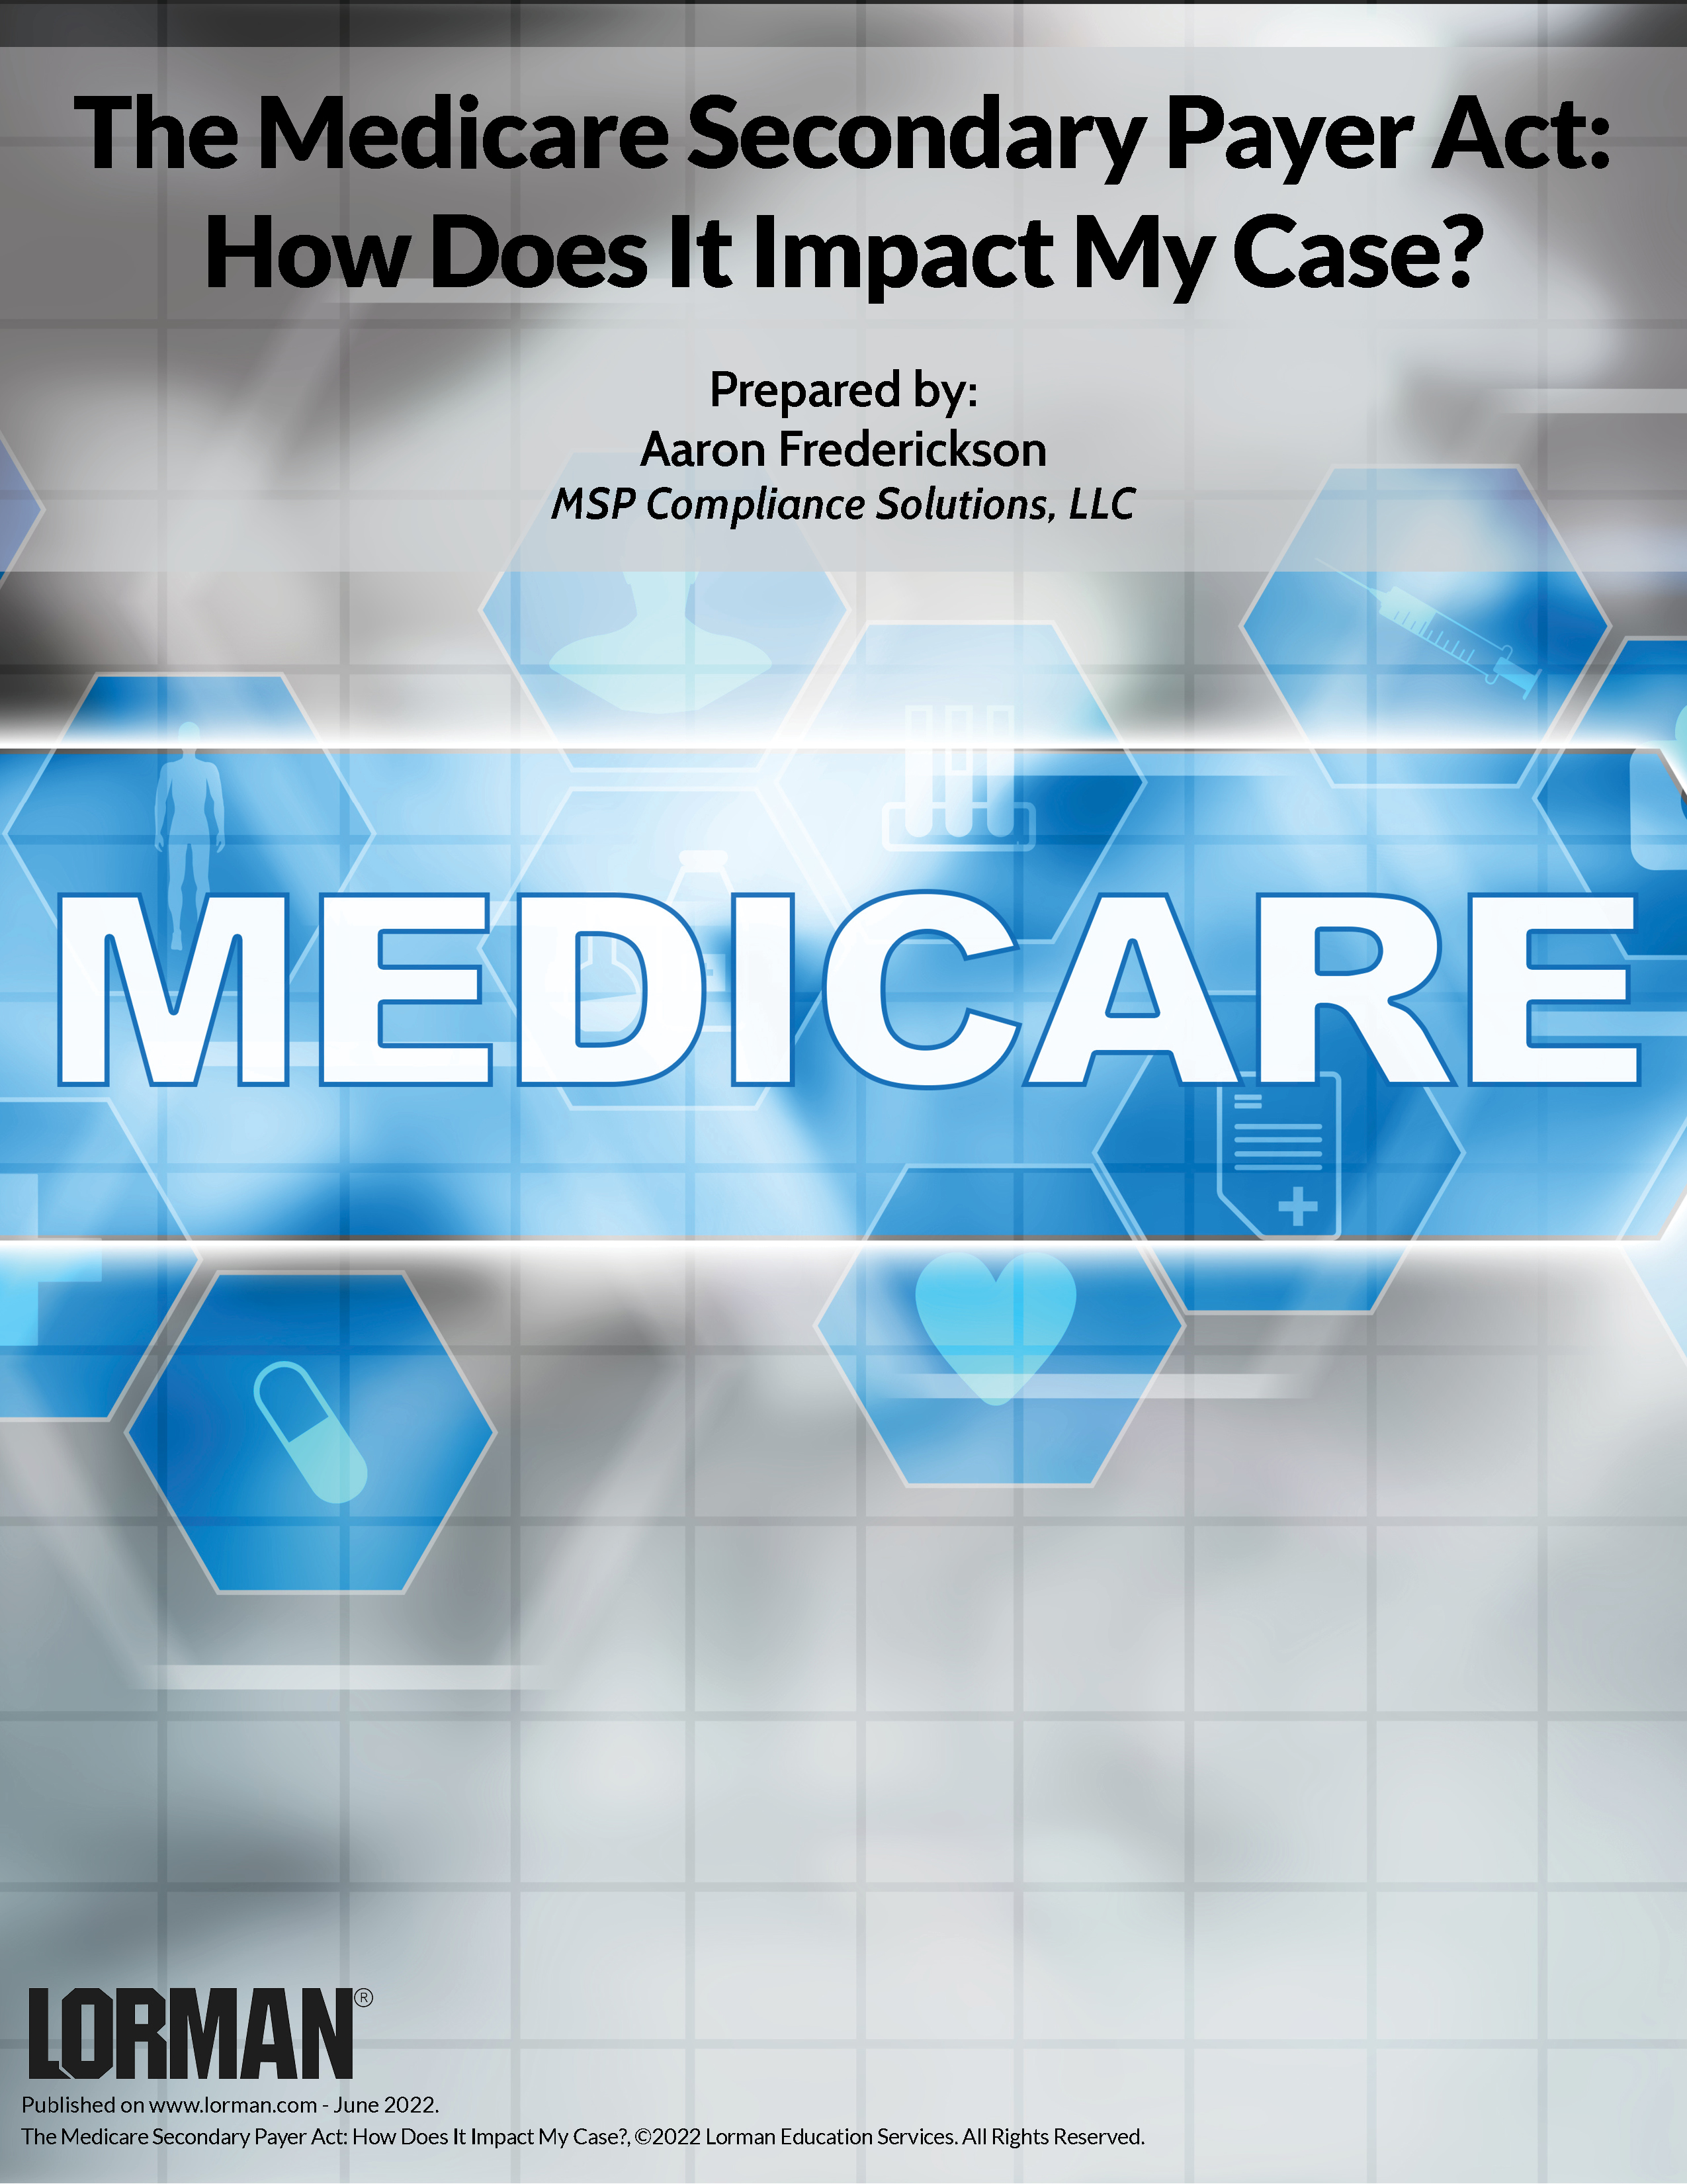 The Medicare Secondary Payer Act: How Does It Impact My Case?